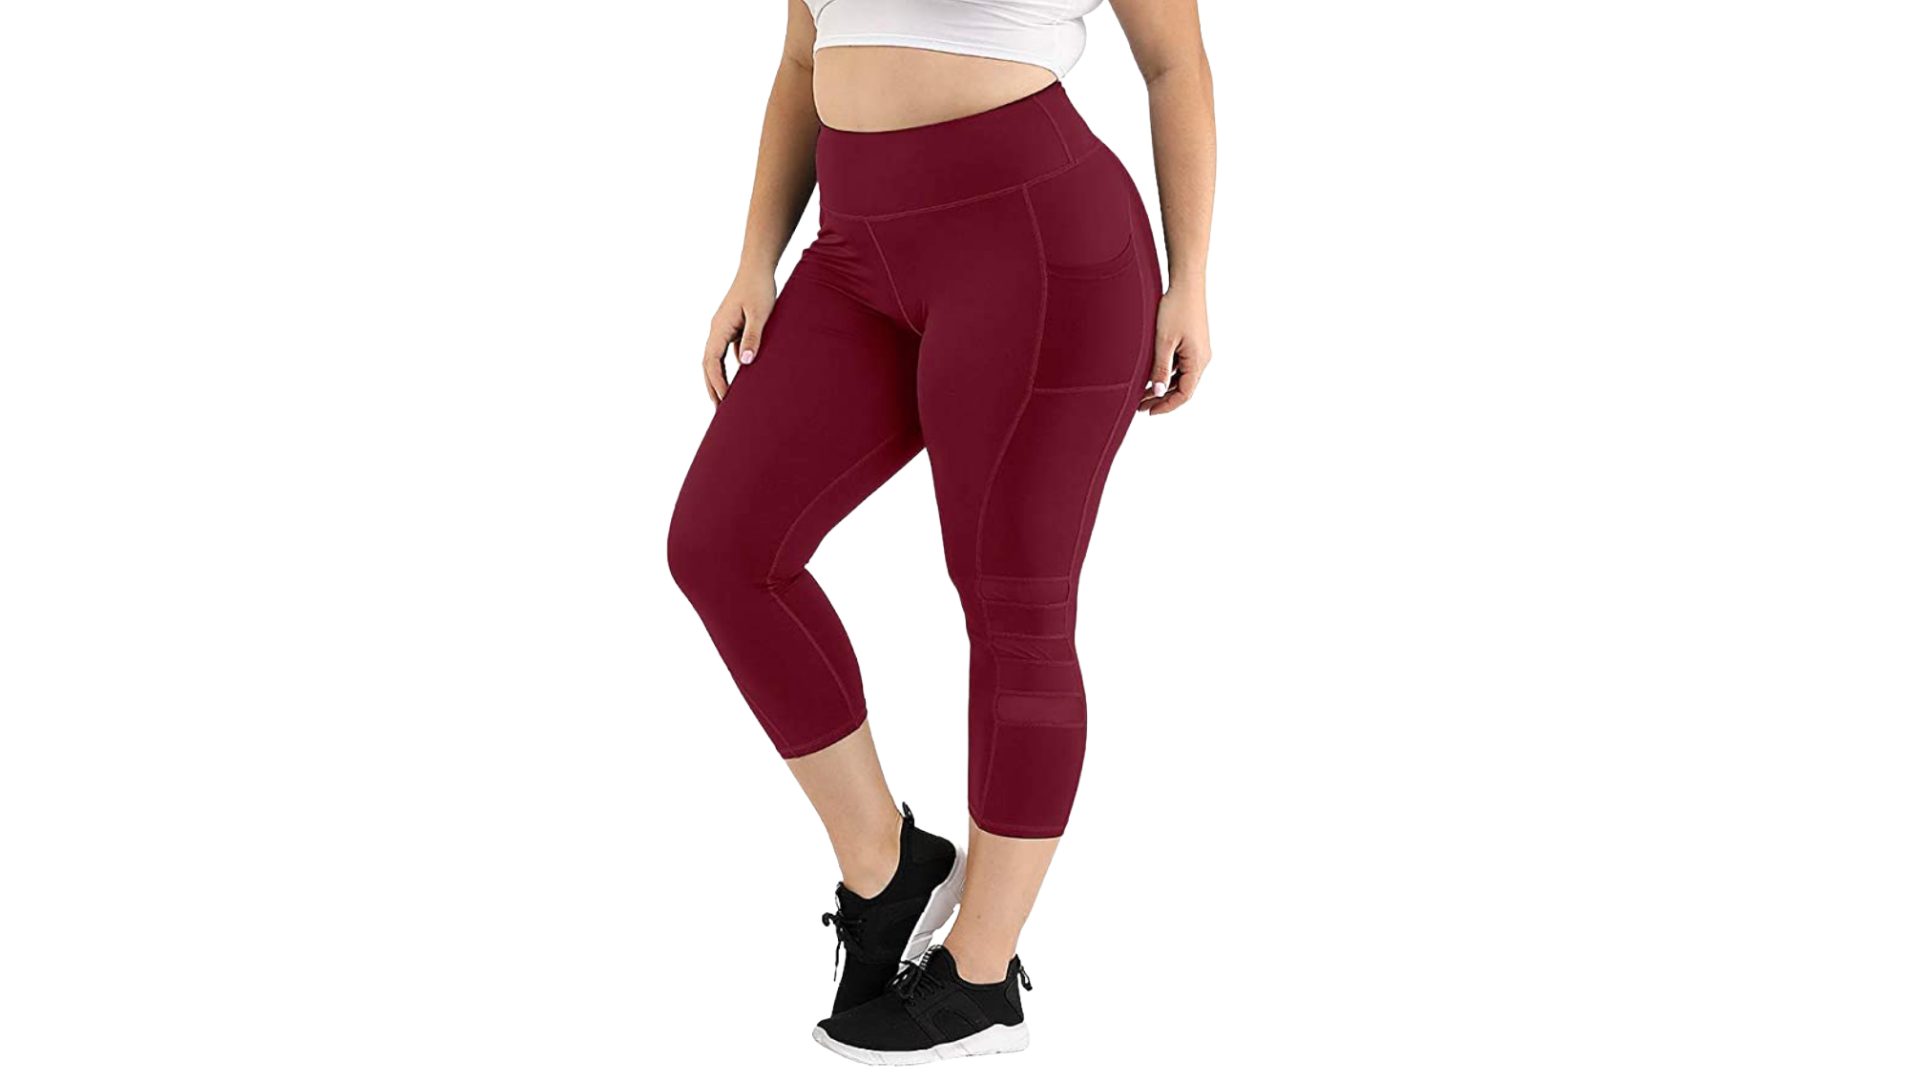 Buy GAYHAY Leggings with Pockets for Women Reg & Plus Size - Capri Yoga  Pants High Waist Tummy Control Compression for Workout Capris Black at